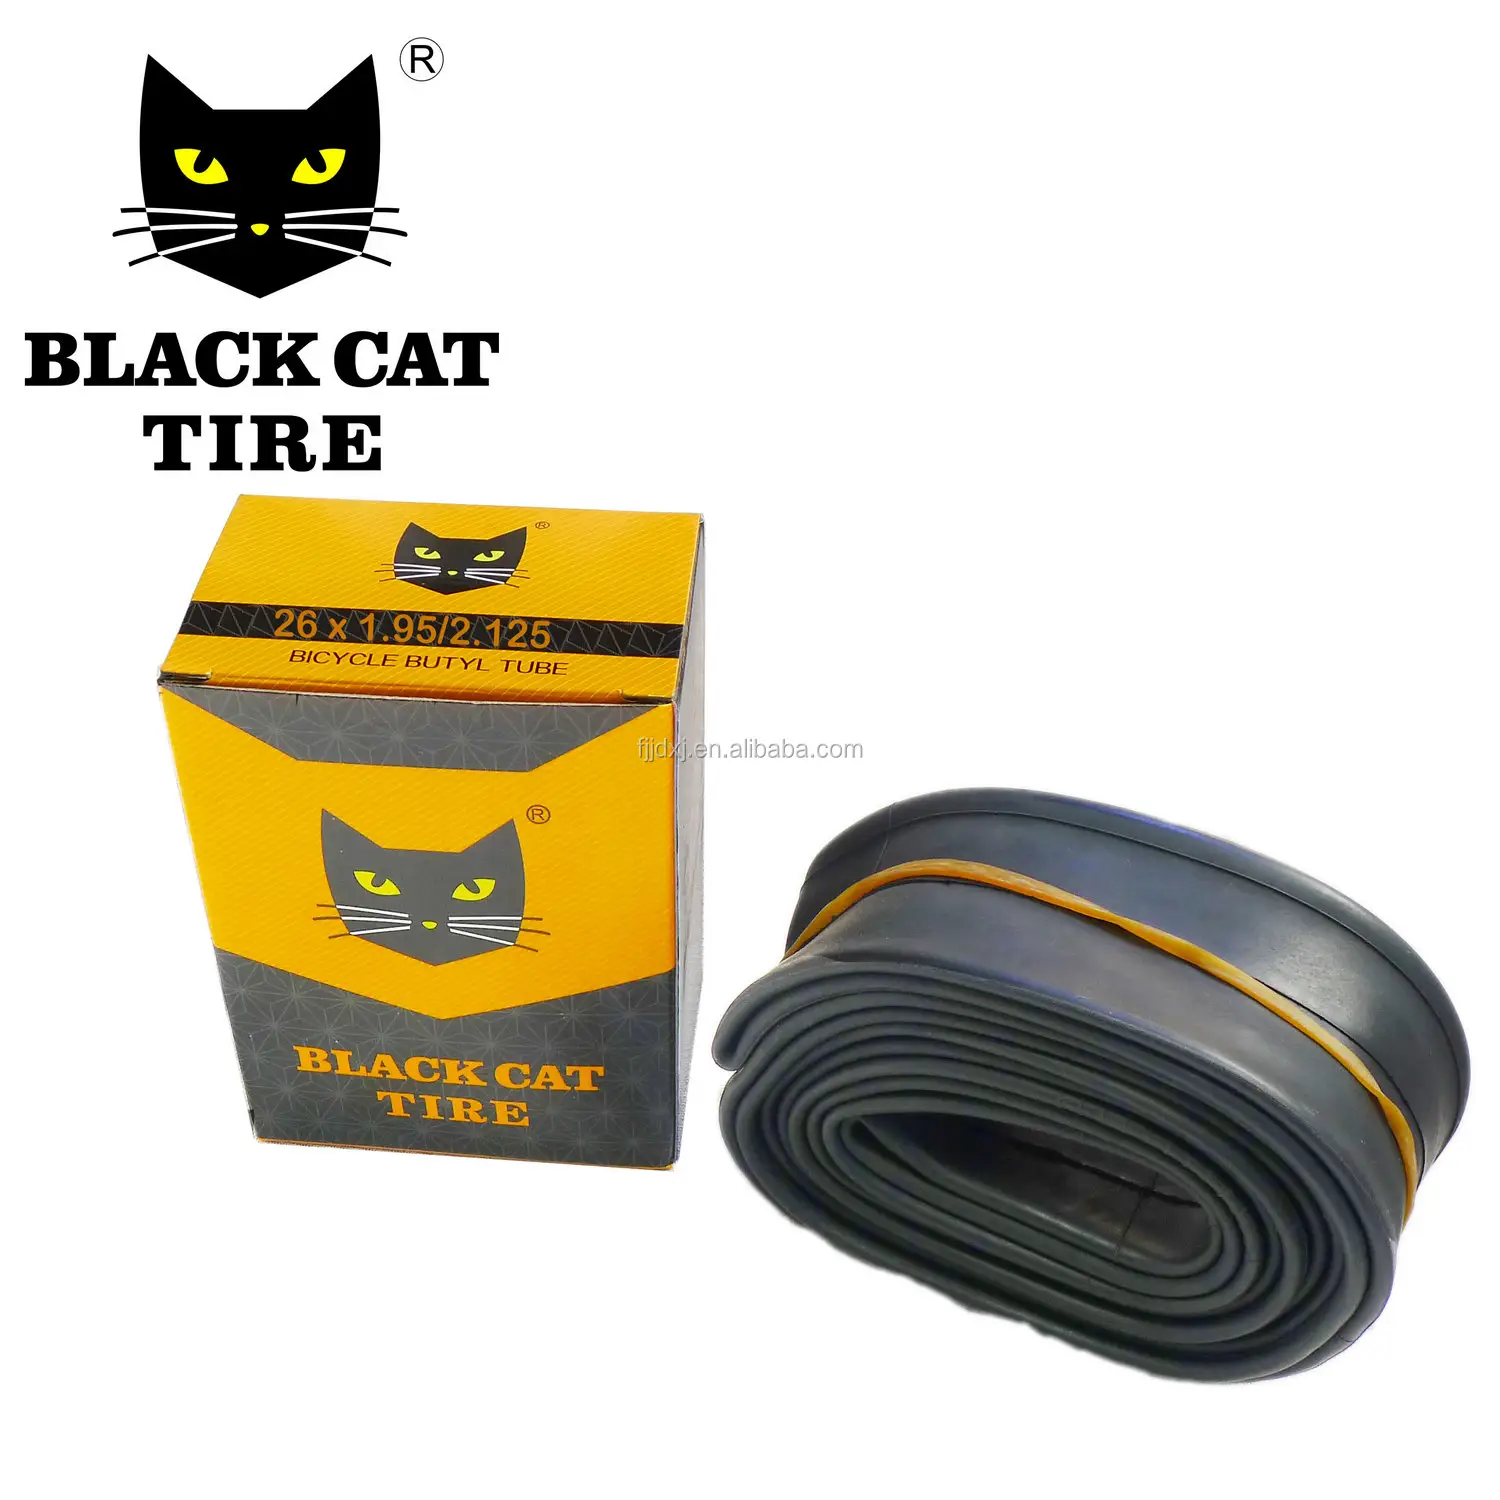 BLACK CAT 26 inches bicycle tire inner tube 26x1.95/2.125 for Mountain bicycles